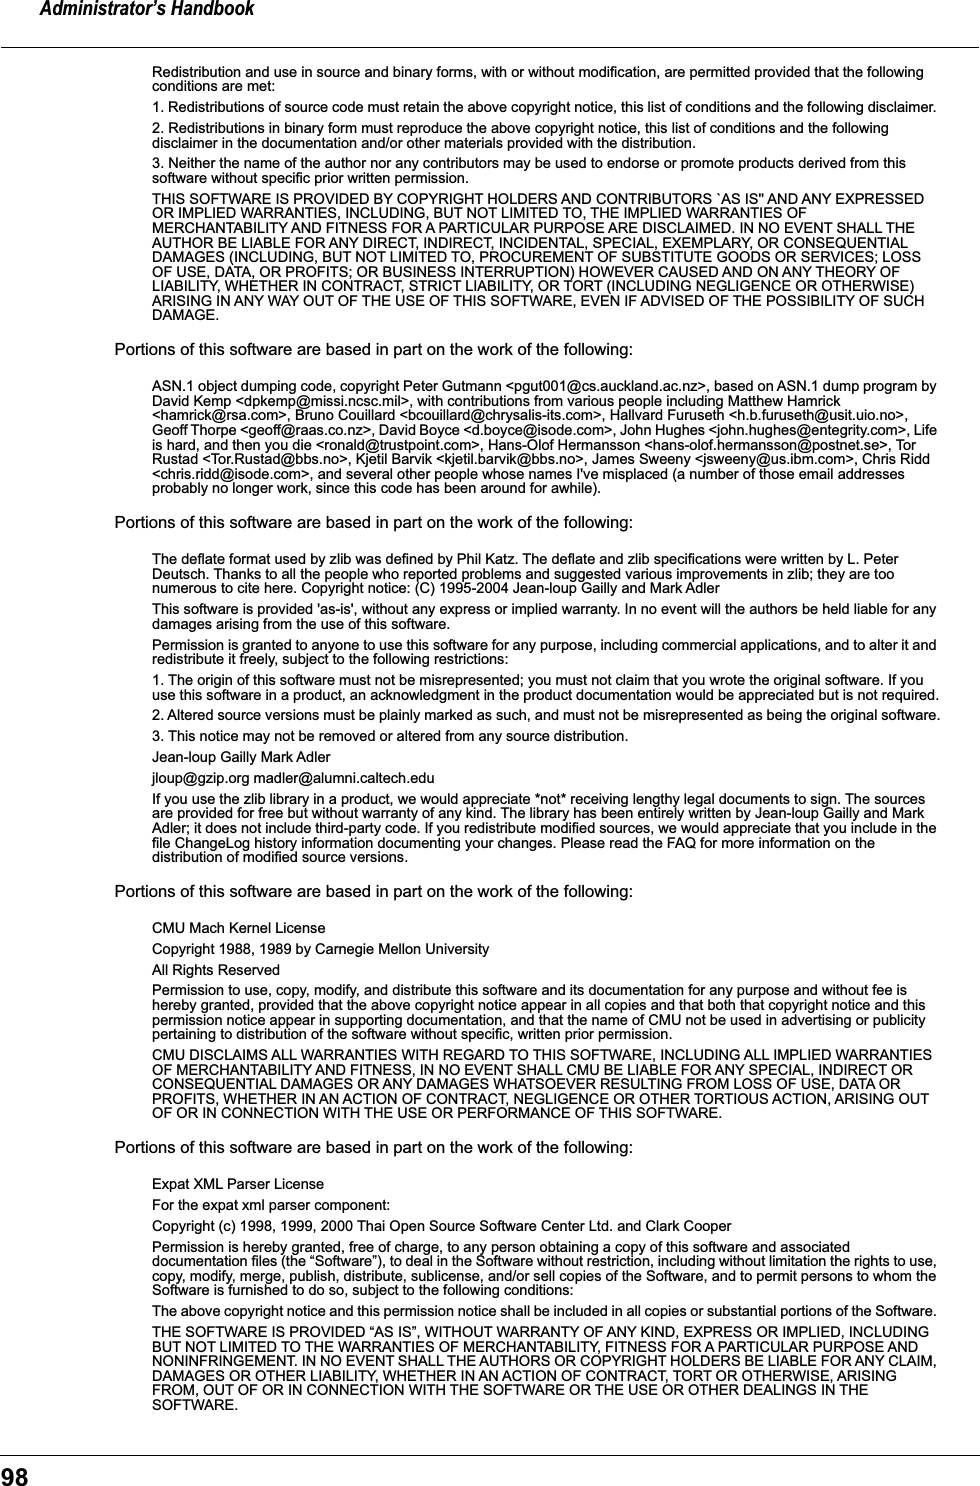 Administrator’s Handbook98Redistribution and use in source and binary forms, with or without modification, are permitted provided that the following conditions are met: 1. Redistributions of source code must retain the above copyright notice, this list of conditions and the following disclaimer. 2. Redistributions in binary form must reproduce the above copyright notice, this list of conditions and the following disclaimer in the documentation and/or other materials provided with the distribution. 3. Neither the name of the author nor any contributors may be used to endorse or promote products derived from this software without specific prior written permission. THIS SOFTWARE IS PROVIDED BY COPYRIGHT HOLDERS AND CONTRIBUTORS `AS IS&apos;&apos; AND ANY EXPRESSED OR IMPLIED WARRANTIES, INCLUDING, BUT NOT LIMITED TO, THE IMPLIED WARRANTIES OF MERCHANTABILITY AND FITNESS FOR A PARTICULAR PURPOSE ARE DISCLAIMED. IN NO EVENT SHALL THE AUTHOR BE LIABLE FOR ANY DIRECT, INDIRECT, INCIDENTAL, SPECIAL, EXEMPLARY, OR CONSEQUENTIAL DAMAGES (INCLUDING, BUT NOT LIMITED TO, PROCUREMENT OF SUBSTITUTE GOODS OR SERVICES; LOSS OF USE, DATA, OR PROFITS; OR BUSINESS INTERRUPTION) HOWEVER CAUSED AND ON ANY THEORY OF LIABILITY, WHETHER IN CONTRACT, STRICT LIABILITY, OR TORT (INCLUDING NEGLIGENCE OR OTHERWISE) ARISING IN ANY WAY OUT OF THE USE OF THIS SOFTWARE, EVEN IF ADVISED OF THE POSSIBILITY OF SUCH DAMAGE. Portions of this software are based in part on the work of the following:ASN.1 object dumping code, copyright Peter Gutmann &lt;pgut001@cs.auckland.ac.nz&gt;, based on ASN.1 dump program by David Kemp &lt;dpkemp@missi.ncsc.mil&gt;, with contributions from various people including Matthew Hamrick &lt;hamrick@rsa.com&gt;, Bruno Couillard &lt;bcouillard@chrysalis-its.com&gt;, Hallvard Furuseth &lt;h.b.furuseth@usit.uio.no&gt;, Geoff Thorpe &lt;geoff@raas.co.nz&gt;, David Boyce &lt;d.boyce@isode.com&gt;, John Hughes &lt;john.hughes@entegrity.com&gt;, Life is hard, and then you die &lt;ronald@trustpoint.com&gt;, Hans-Olof Hermansson &lt;hans-olof.hermansson@postnet.se&gt;, Tor Rustad &lt;Tor.Rustad@bbs.no&gt;, Kjetil Barvik &lt;kjetil.barvik@bbs.no&gt;, James Sweeny &lt;jsweeny@us.ibm.com&gt;, Chris Ridd &lt;chris.ridd@isode.com&gt;, and several other people whose names I&apos;ve misplaced (a number of those email addresses probably no longer work, since this code has been around for awhile). Portions of this software are based in part on the work of the following:The deflate format used by zlib was defined by Phil Katz. The deflate and zlib specifications were written by L. Peter Deutsch. Thanks to all the people who reported problems and suggested various improvements in zlib; they are too numerous to cite here. Copyright notice: (C) 1995-2004 Jean-loup Gailly and Mark AdlerThis software is provided &apos;as-is&apos;, without any express or implied warranty. In no event will the authors be held liable for any damages arising from the use of this software.Permission is granted to anyone to use this software for any purpose, including commercial applications, and to alter it and redistribute it freely, subject to the following restrictions:1. The origin of this software must not be misrepresented; you must not claim that you wrote the original software. If you use this software in a product, an acknowledgment in the product documentation would be appreciated but is not required.2. Altered source versions must be plainly marked as such, and must not be misrepresented as being the original software.3. This notice may not be removed or altered from any source distribution.Jean-loup Gailly Mark Adlerjloup@gzip.org madler@alumni.caltech.eduIf you use the zlib library in a product, we would appreciate *not* receiving lengthy legal documents to sign. The sources are provided for free but without warranty of any kind. The library has been entirely written by Jean-loup Gailly and Mark Adler; it does not include third-party code. If you redistribute modified sources, we would appreciate that you include in the file ChangeLog history information documenting your changes. Please read the FAQ for more information on the distribution of modified source versions.Portions of this software are based in part on the work of the following:CMU Mach Kernel LicenseCopyright 1988, 1989 by Carnegie Mellon University All Rights Reserved Permission to use, copy, modify, and distribute this software and its documentation for any purpose and without fee is hereby granted, provided that the above copyright notice appear in all copies and that both that copyright notice and this permission notice appear in supporting documentation, and that the name of CMU not be used in advertising or publicity pertaining to distribution of the software without specific, written prior permission. CMU DISCLAIMS ALL WARRANTIES WITH REGARD TO THIS SOFTWARE, INCLUDING ALL IMPLIED WARRANTIES OF MERCHANTABILITY AND FITNESS, IN NO EVENT SHALL CMU BE LIABLE FOR ANY SPECIAL, INDIRECT OR CONSEQUENTIAL DAMAGES OR ANY DAMAGES WHATSOEVER RESULTING FROM LOSS OF USE, DATA OR PROFITS, WHETHER IN AN ACTION OF CONTRACT, NEGLIGENCE OR OTHER TORTIOUS ACTION, ARISING OUT OF OR IN CONNECTION WITH THE USE OR PERFORMANCE OF THIS SOFTWARE.Portions of this software are based in part on the work of the following:Expat XML Parser License For the expat xml parser component: Copyright (c) 1998, 1999, 2000 Thai Open Source Software Center Ltd. and Clark Cooper Permission is hereby granted, free of charge, to any person obtaining a copy of this software and associated documentation files (the “Software”), to deal in the Software without restriction, including without limitation the rights to use, copy, modify, merge, publish, distribute, sublicense, and/or sell copies of the Software, and to permit persons to whom the Software is furnished to do so, subject to the following conditions: The above copyright notice and this permission notice shall be included in all copies or substantial portions of the Software. THE SOFTWARE IS PROVIDED “AS IS”, WITHOUT WARRANTY OF ANY KIND, EXPRESS OR IMPLIED, INCLUDING BUT NOT LIMITED TO THE WARRANTIES OF MERCHANTABILITY, FITNESS FOR A PARTICULAR PURPOSE AND NONINFRINGEMENT. IN NO EVENT SHALL THE AUTHORS OR COPYRIGHT HOLDERS BE LIABLE FOR ANY CLAIM, DAMAGES OR OTHER LIABILITY, WHETHER IN AN ACTION OF CONTRACT, TORT OR OTHERWISE, ARISING FROM, OUT OF OR IN CONNECTION WITH THE SOFTWARE OR THE USE OR OTHER DEALINGS IN THE SOFTWARE. 